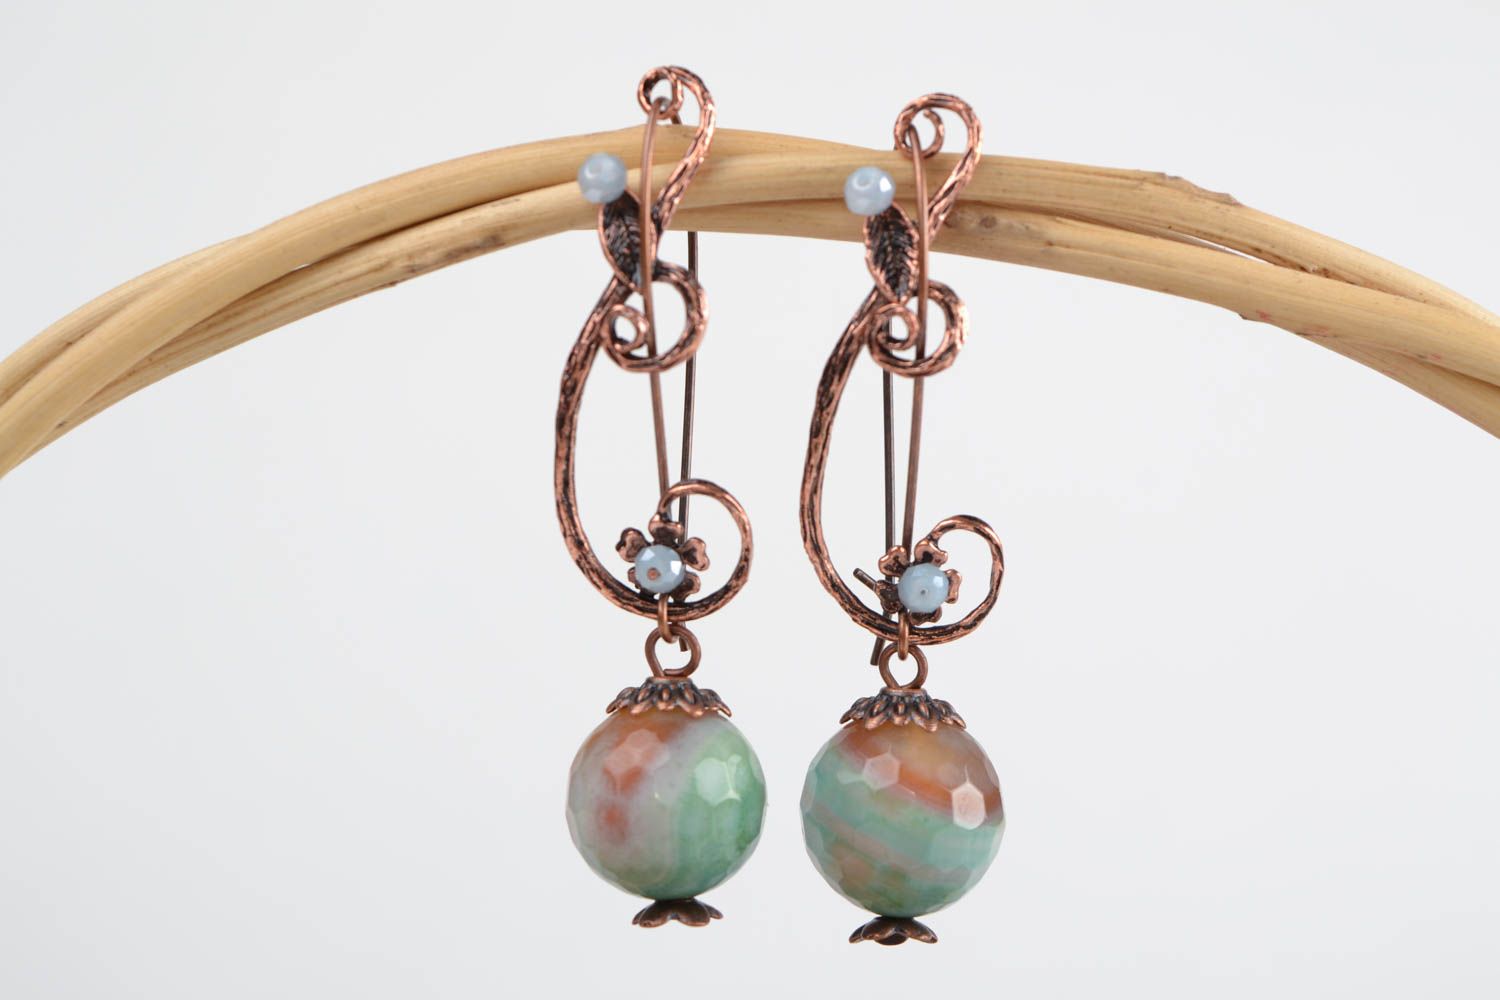 Handmade long dangling earrings with agate beads and fancy metal fittings photo 1